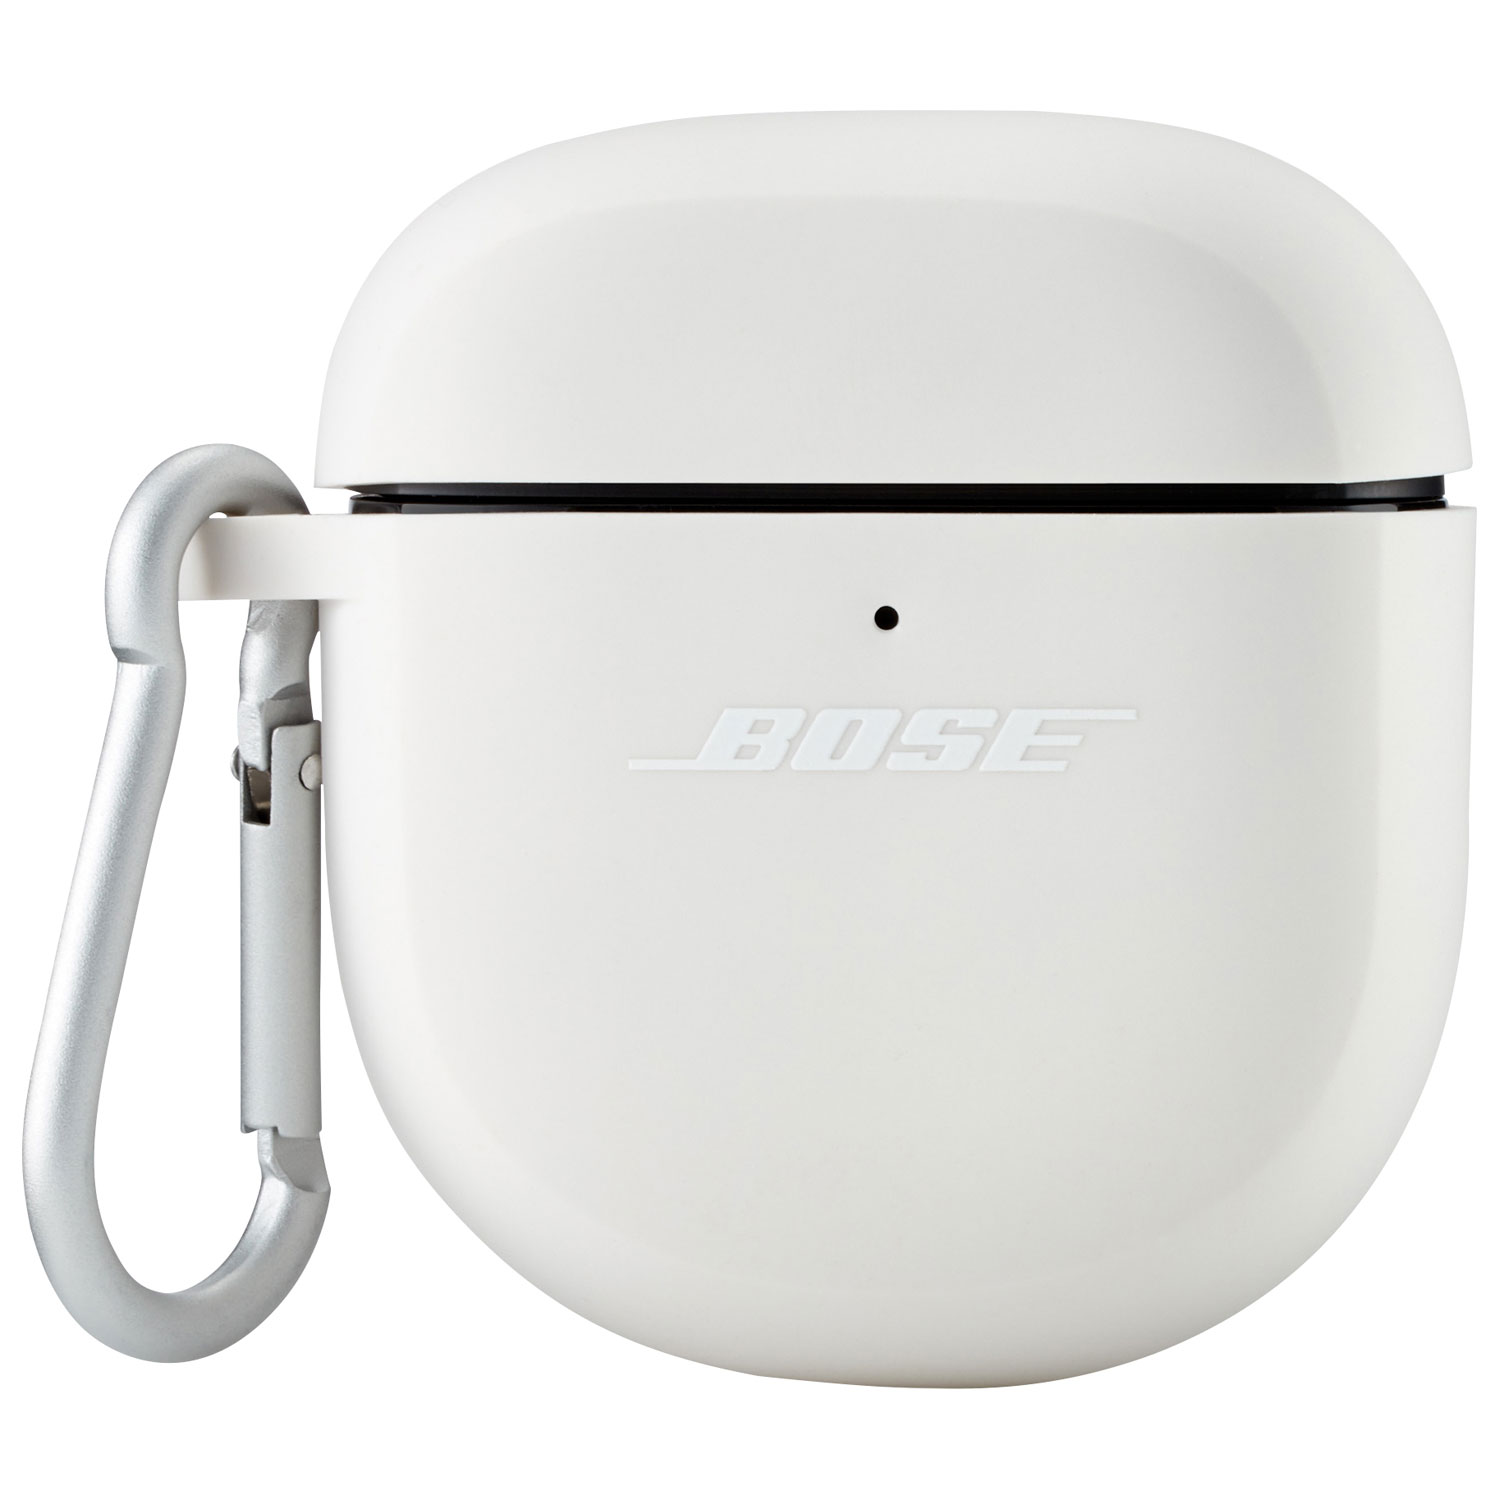 Bose Silicone Case for Bose QuietComfort Earbuds II Headphones - Soapstone